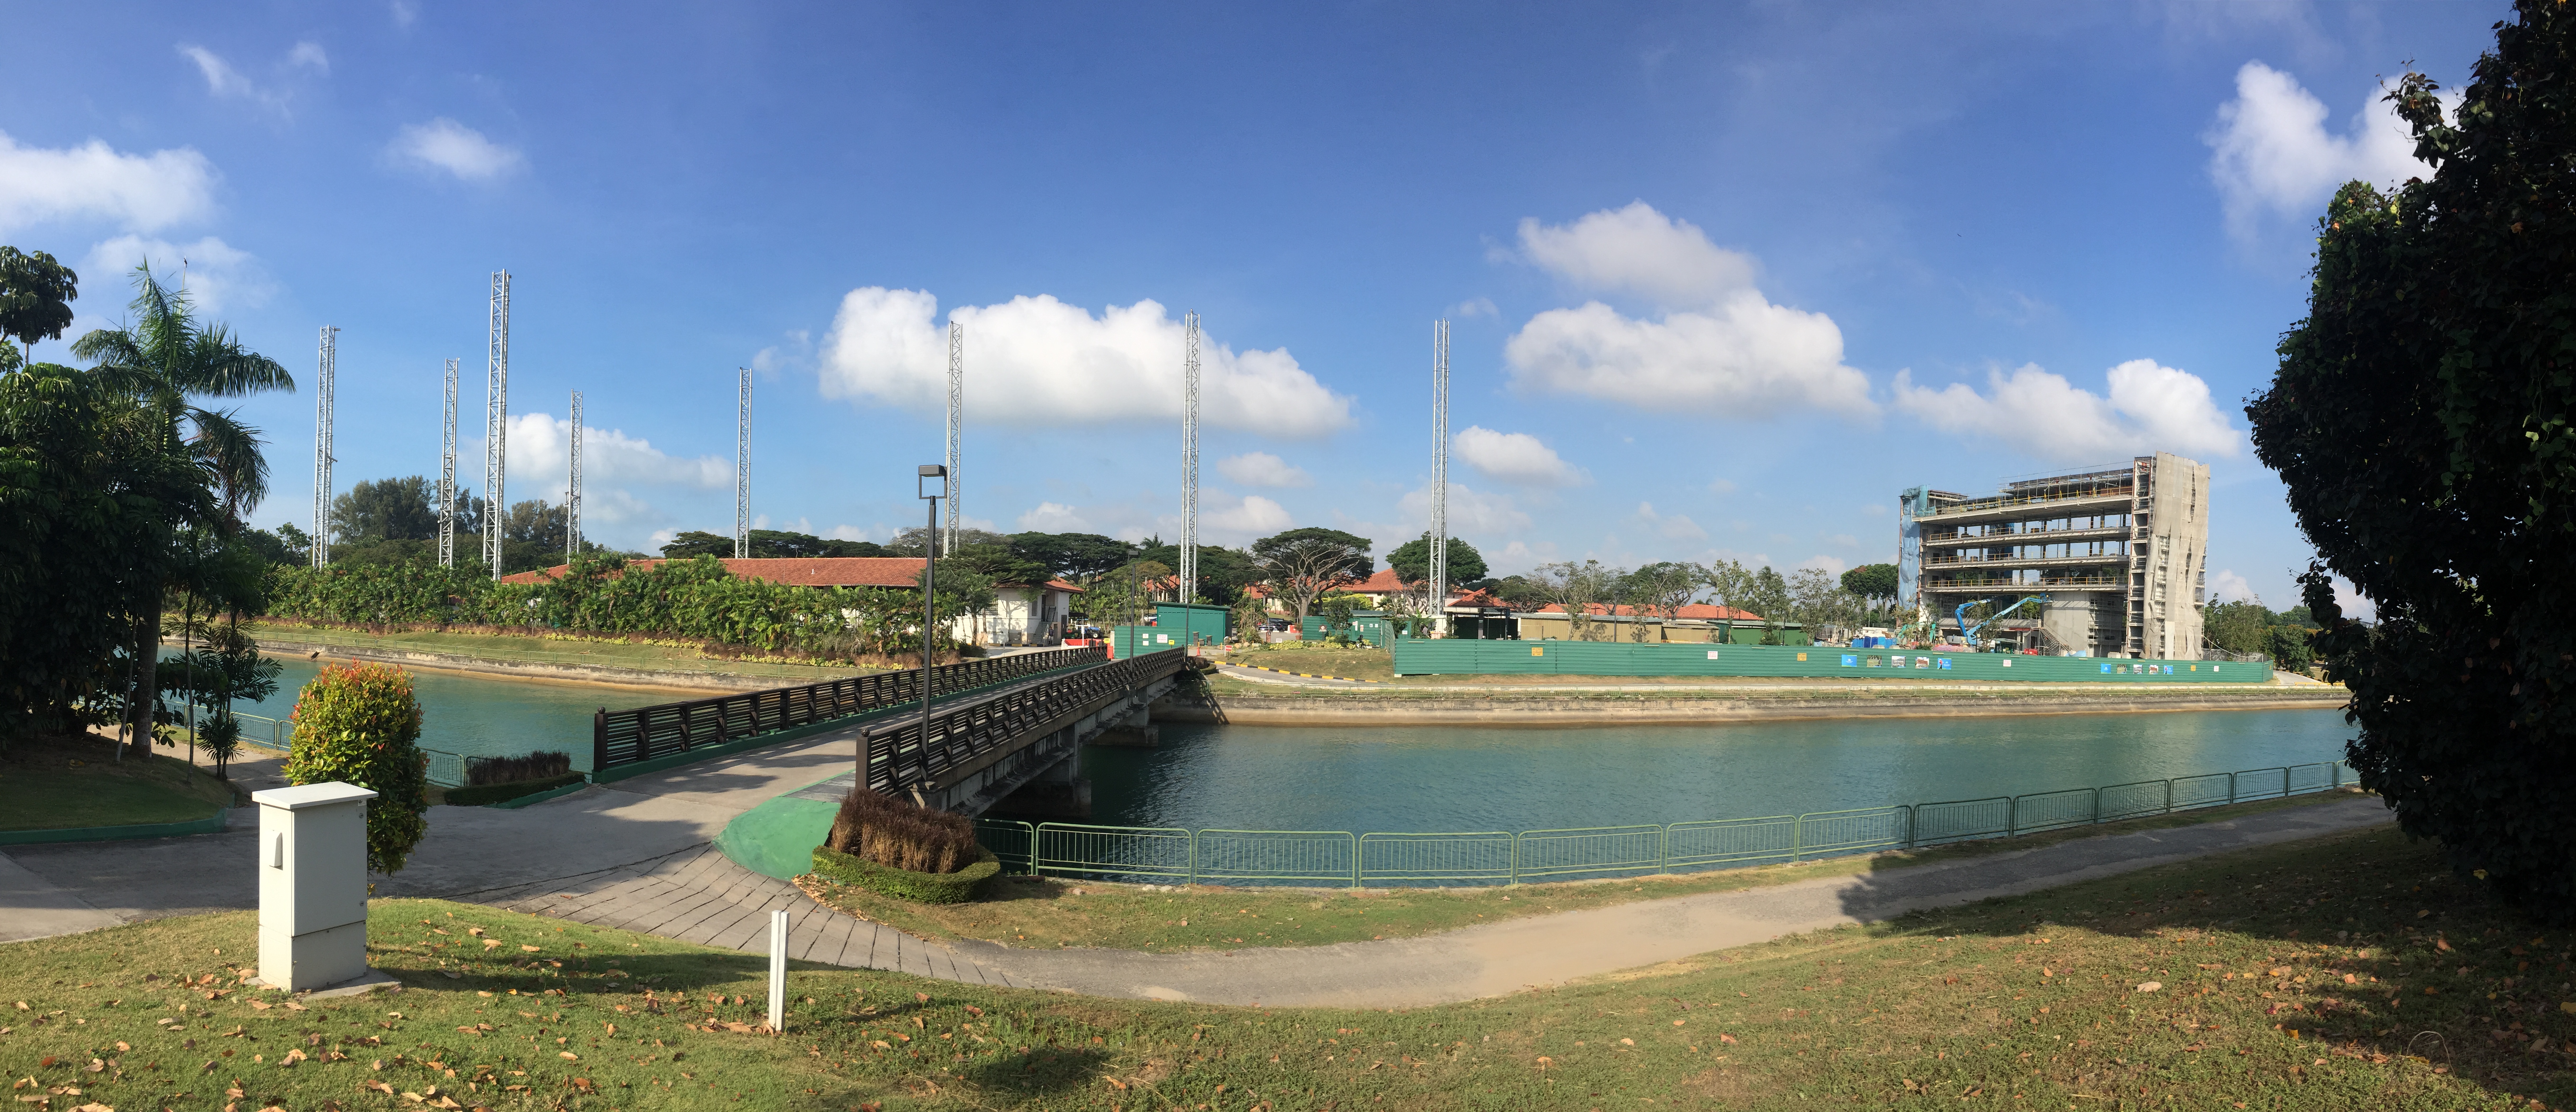 Overview of golf driving range construction site beside the canal